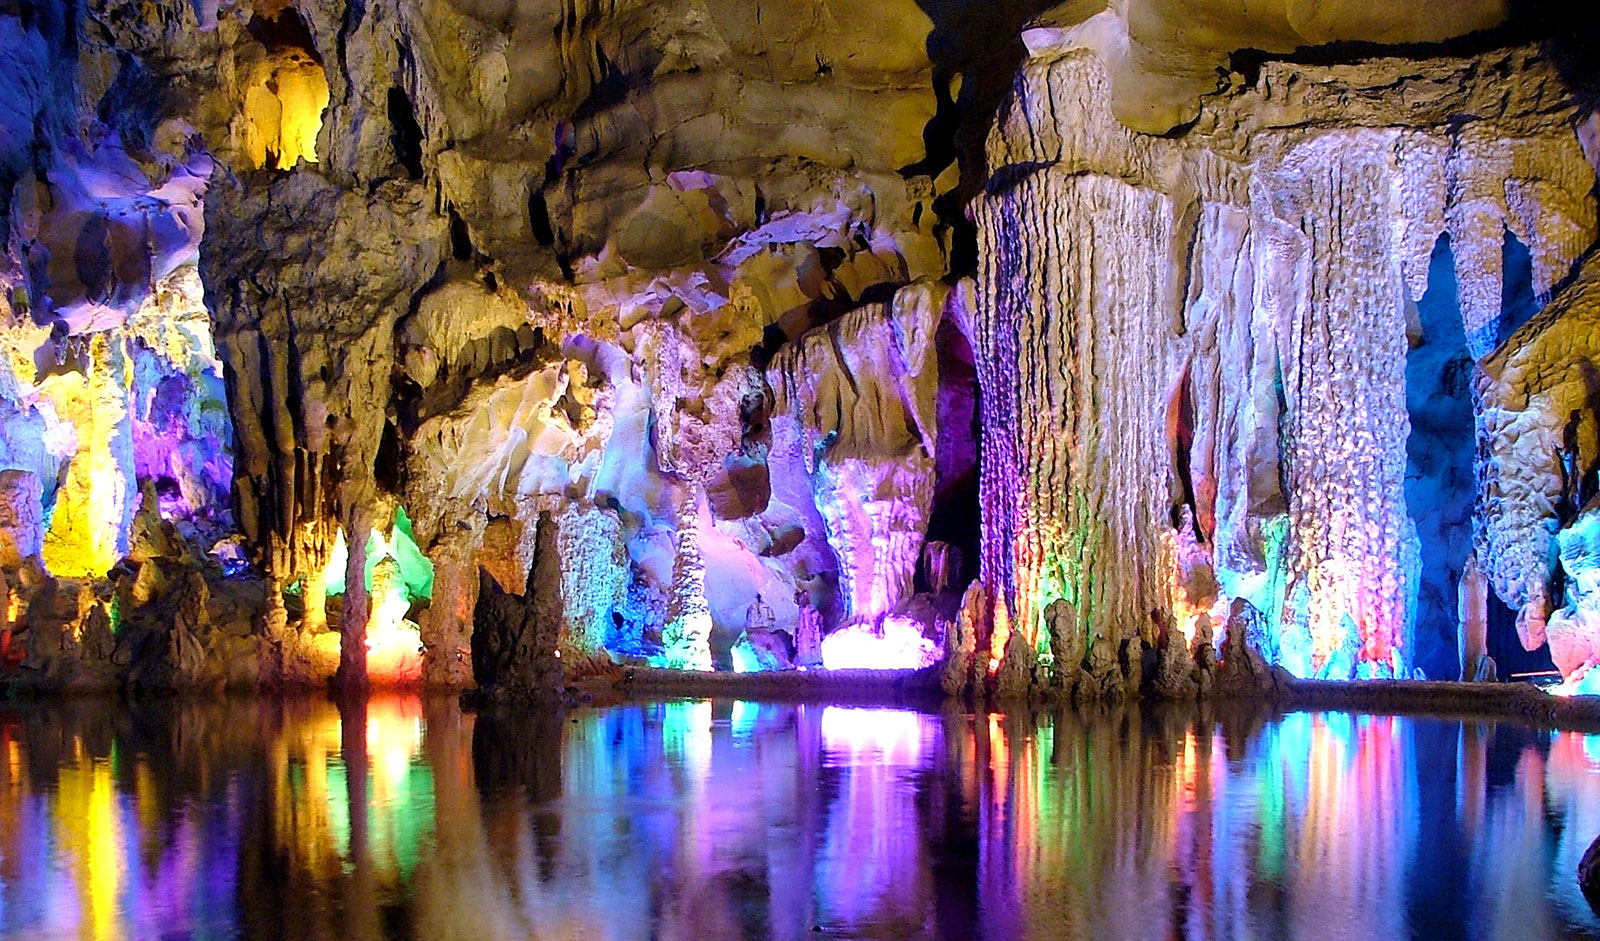 Reed Flute Cave China- The Reed Flute cave has been a popular destination for well over a thousand years, as evidenced by transcriptions inside that date back to 792 AD. It was named for the reeds that grow just outside the entrance, which can be made into flutes. The formations inside the cave are just incredible, and combined with all the surreal lighting, they prove that amazing things can happen when man and nature's efforts combine.